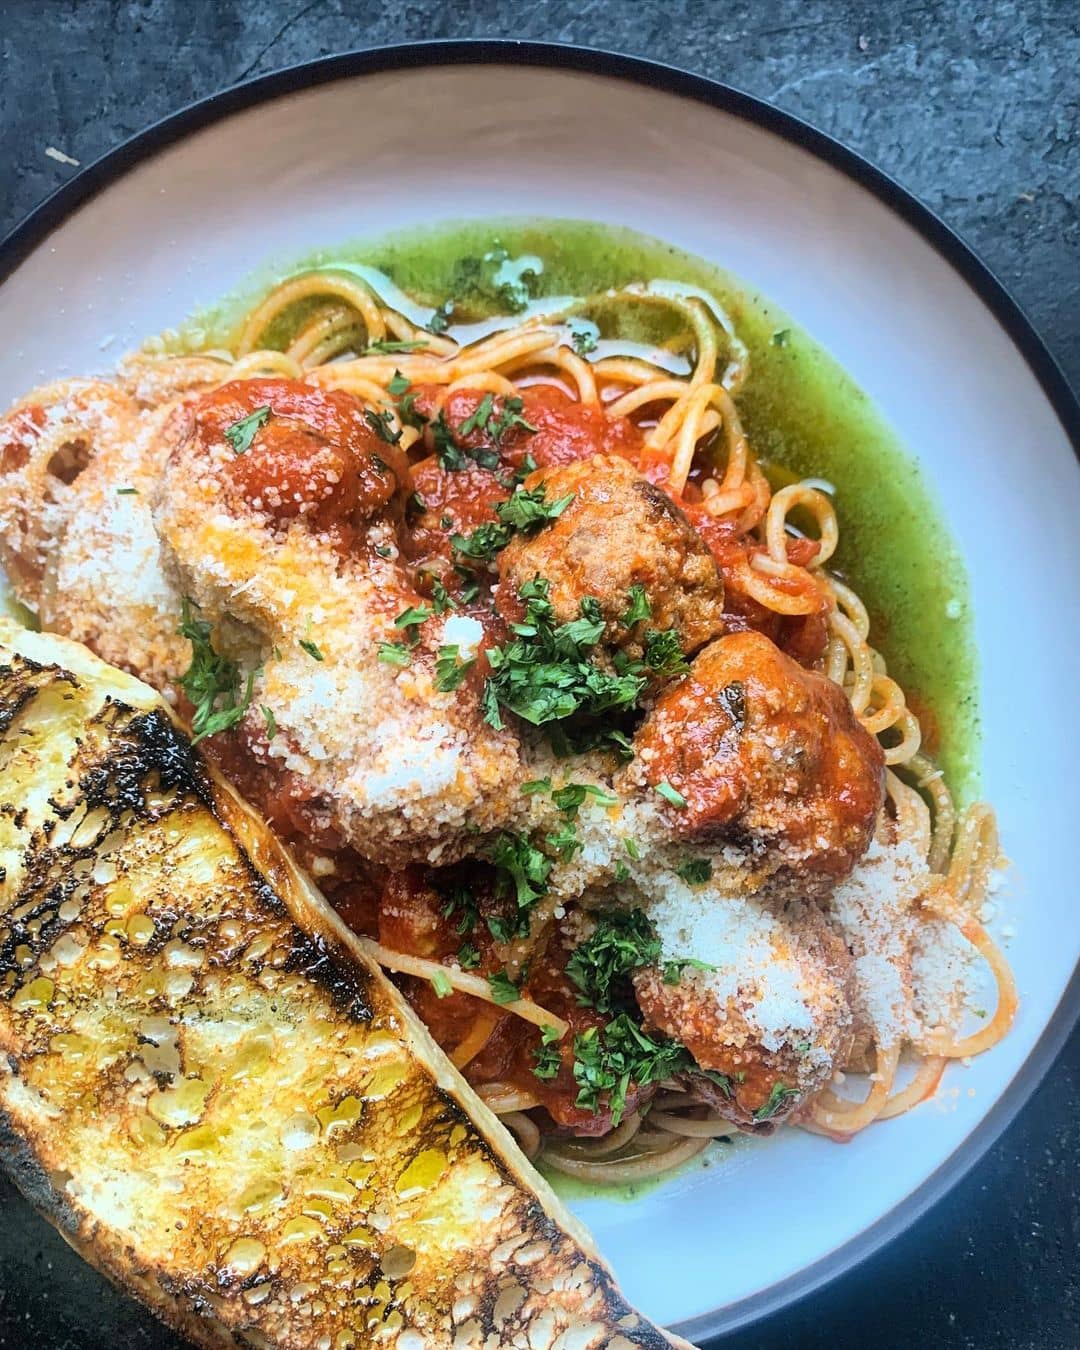 Places to Eat and Drink in Tofino - shelter restaurant spaghetti and meatball